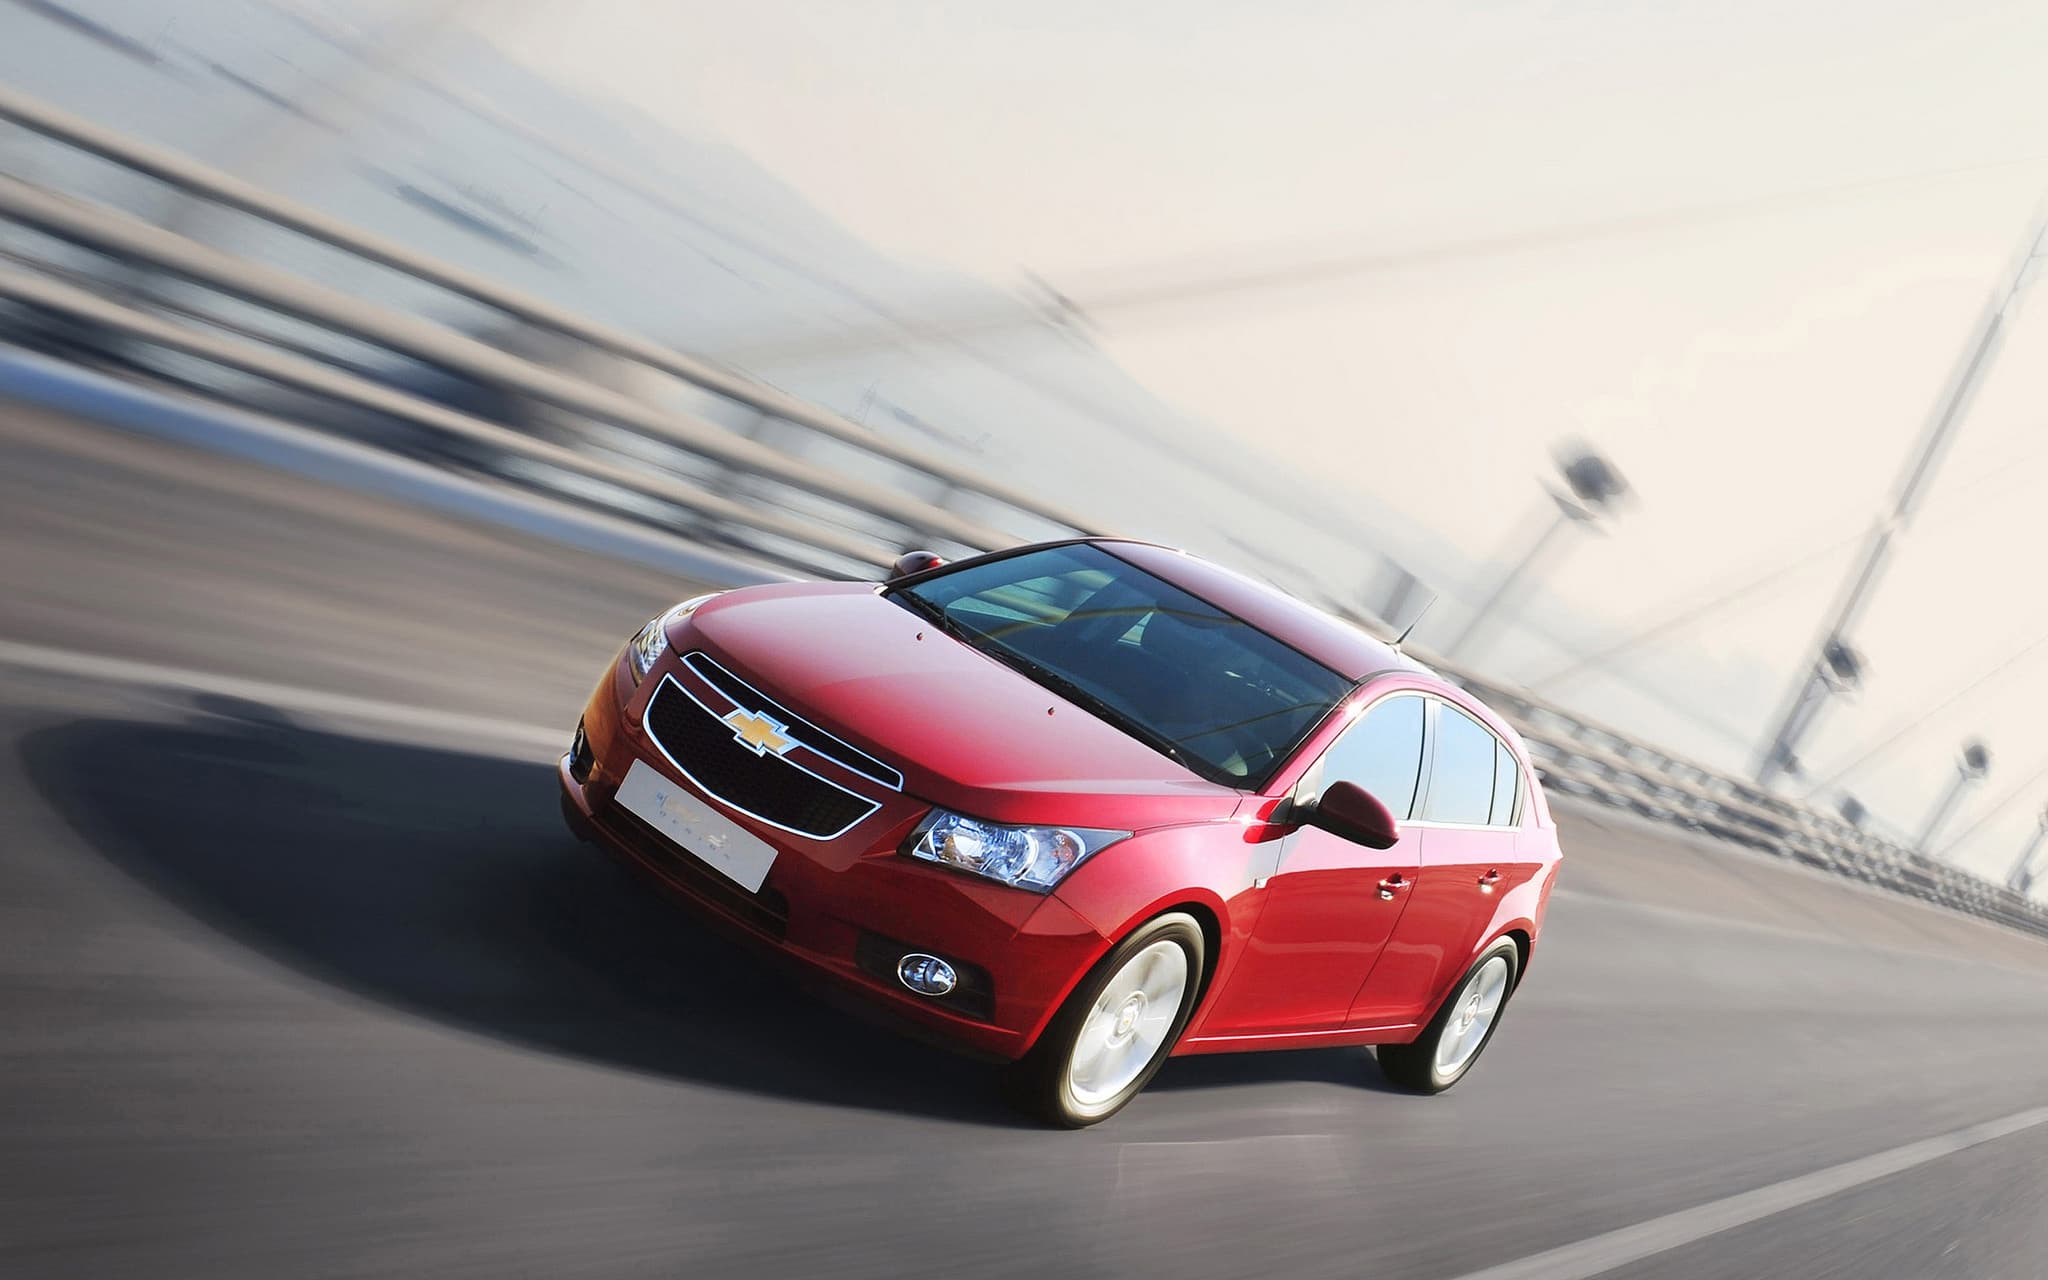 Chevrolet Cruze wallpaper HD High Quality free Download